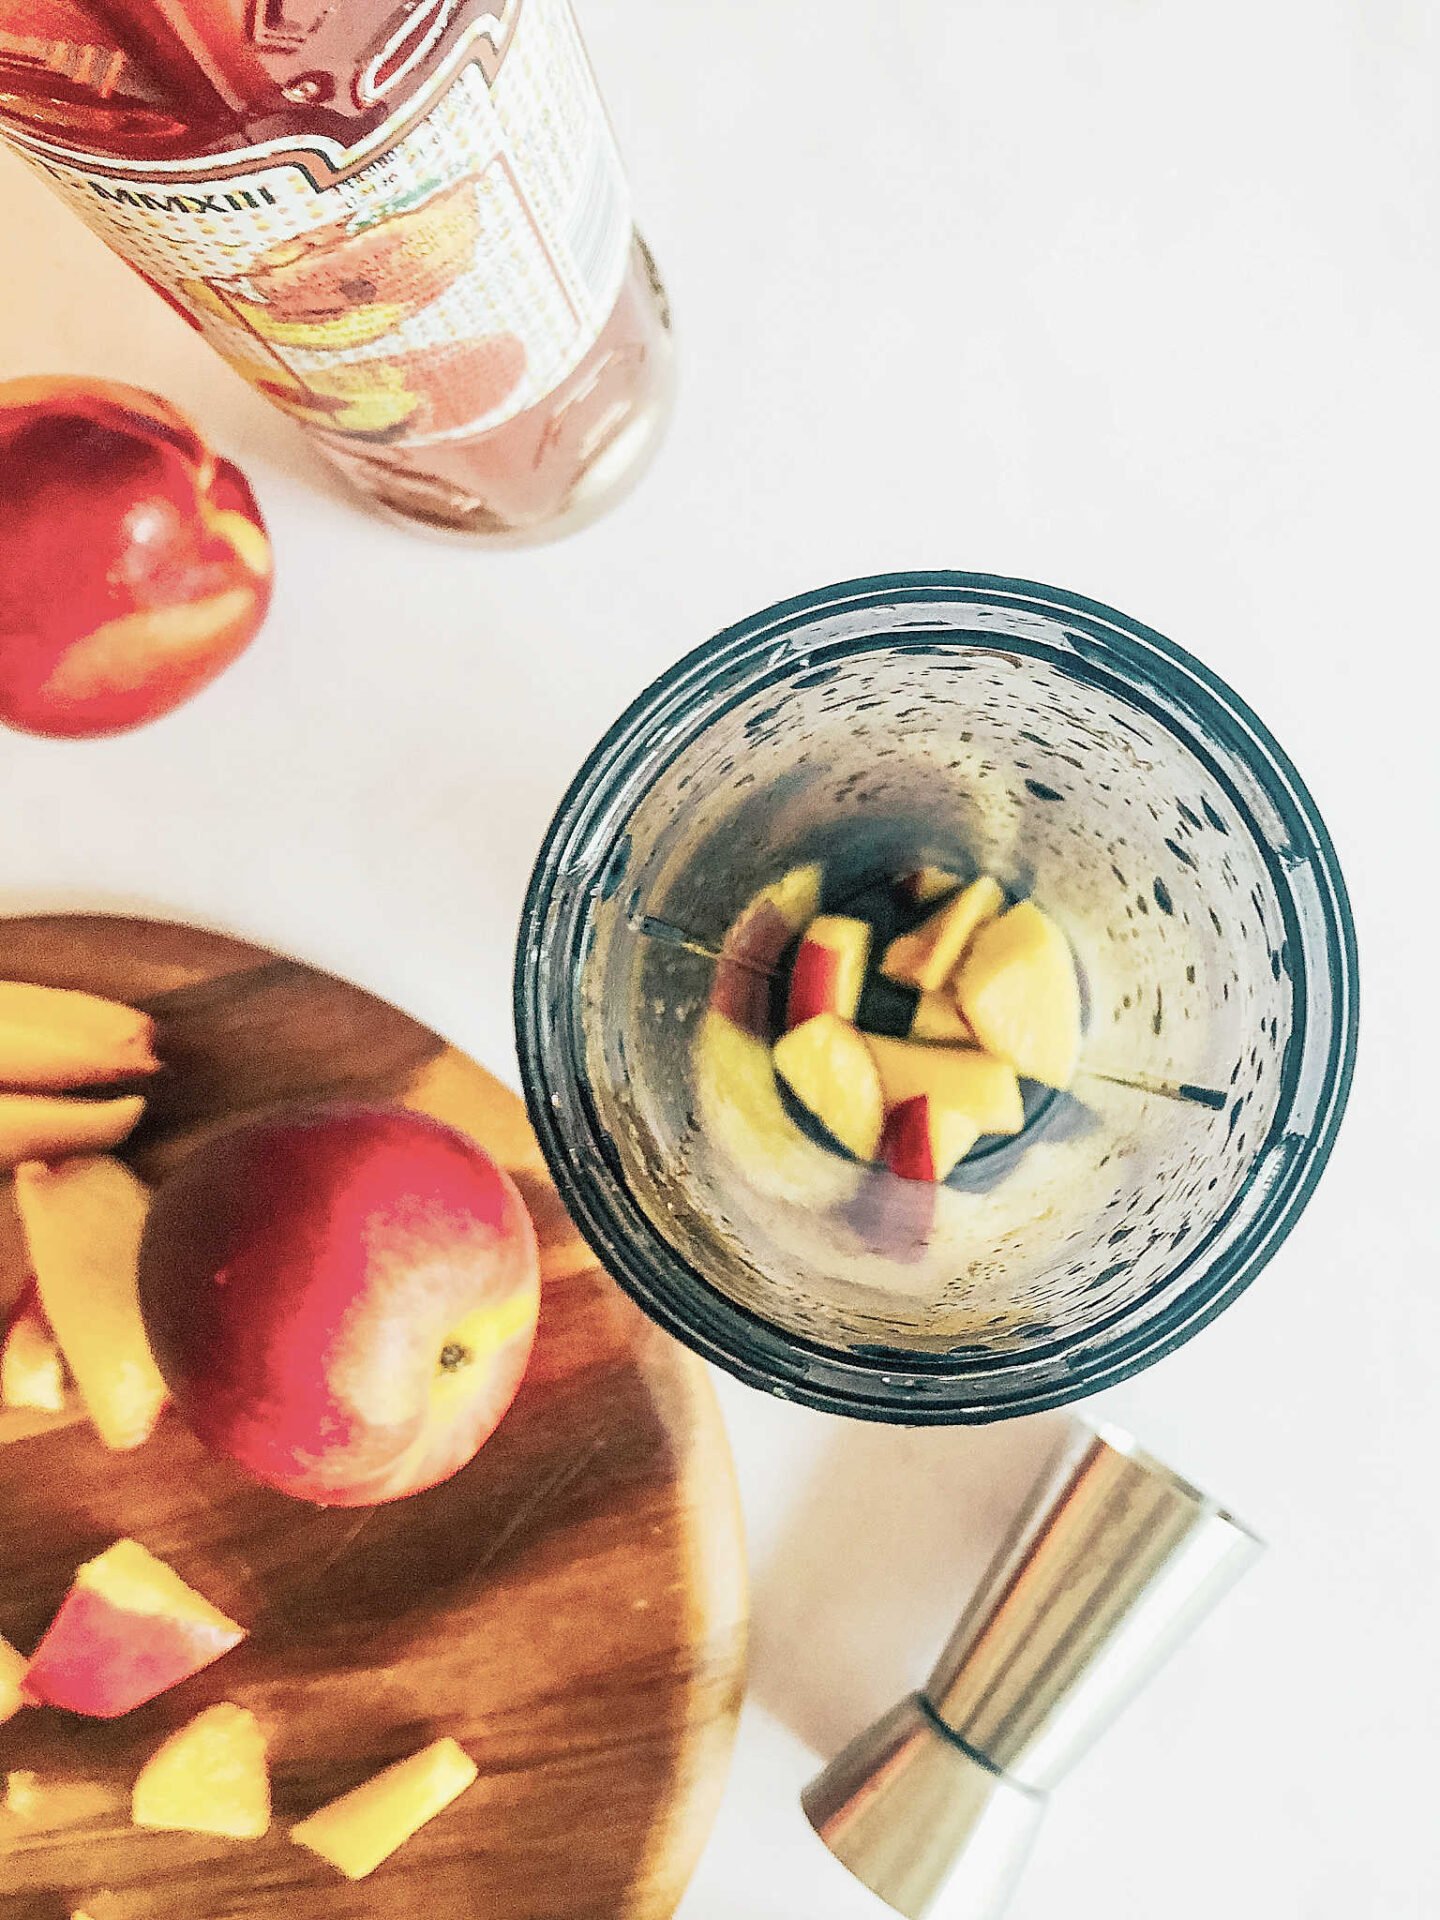 chop 1 peach into small chinks and place in a blender